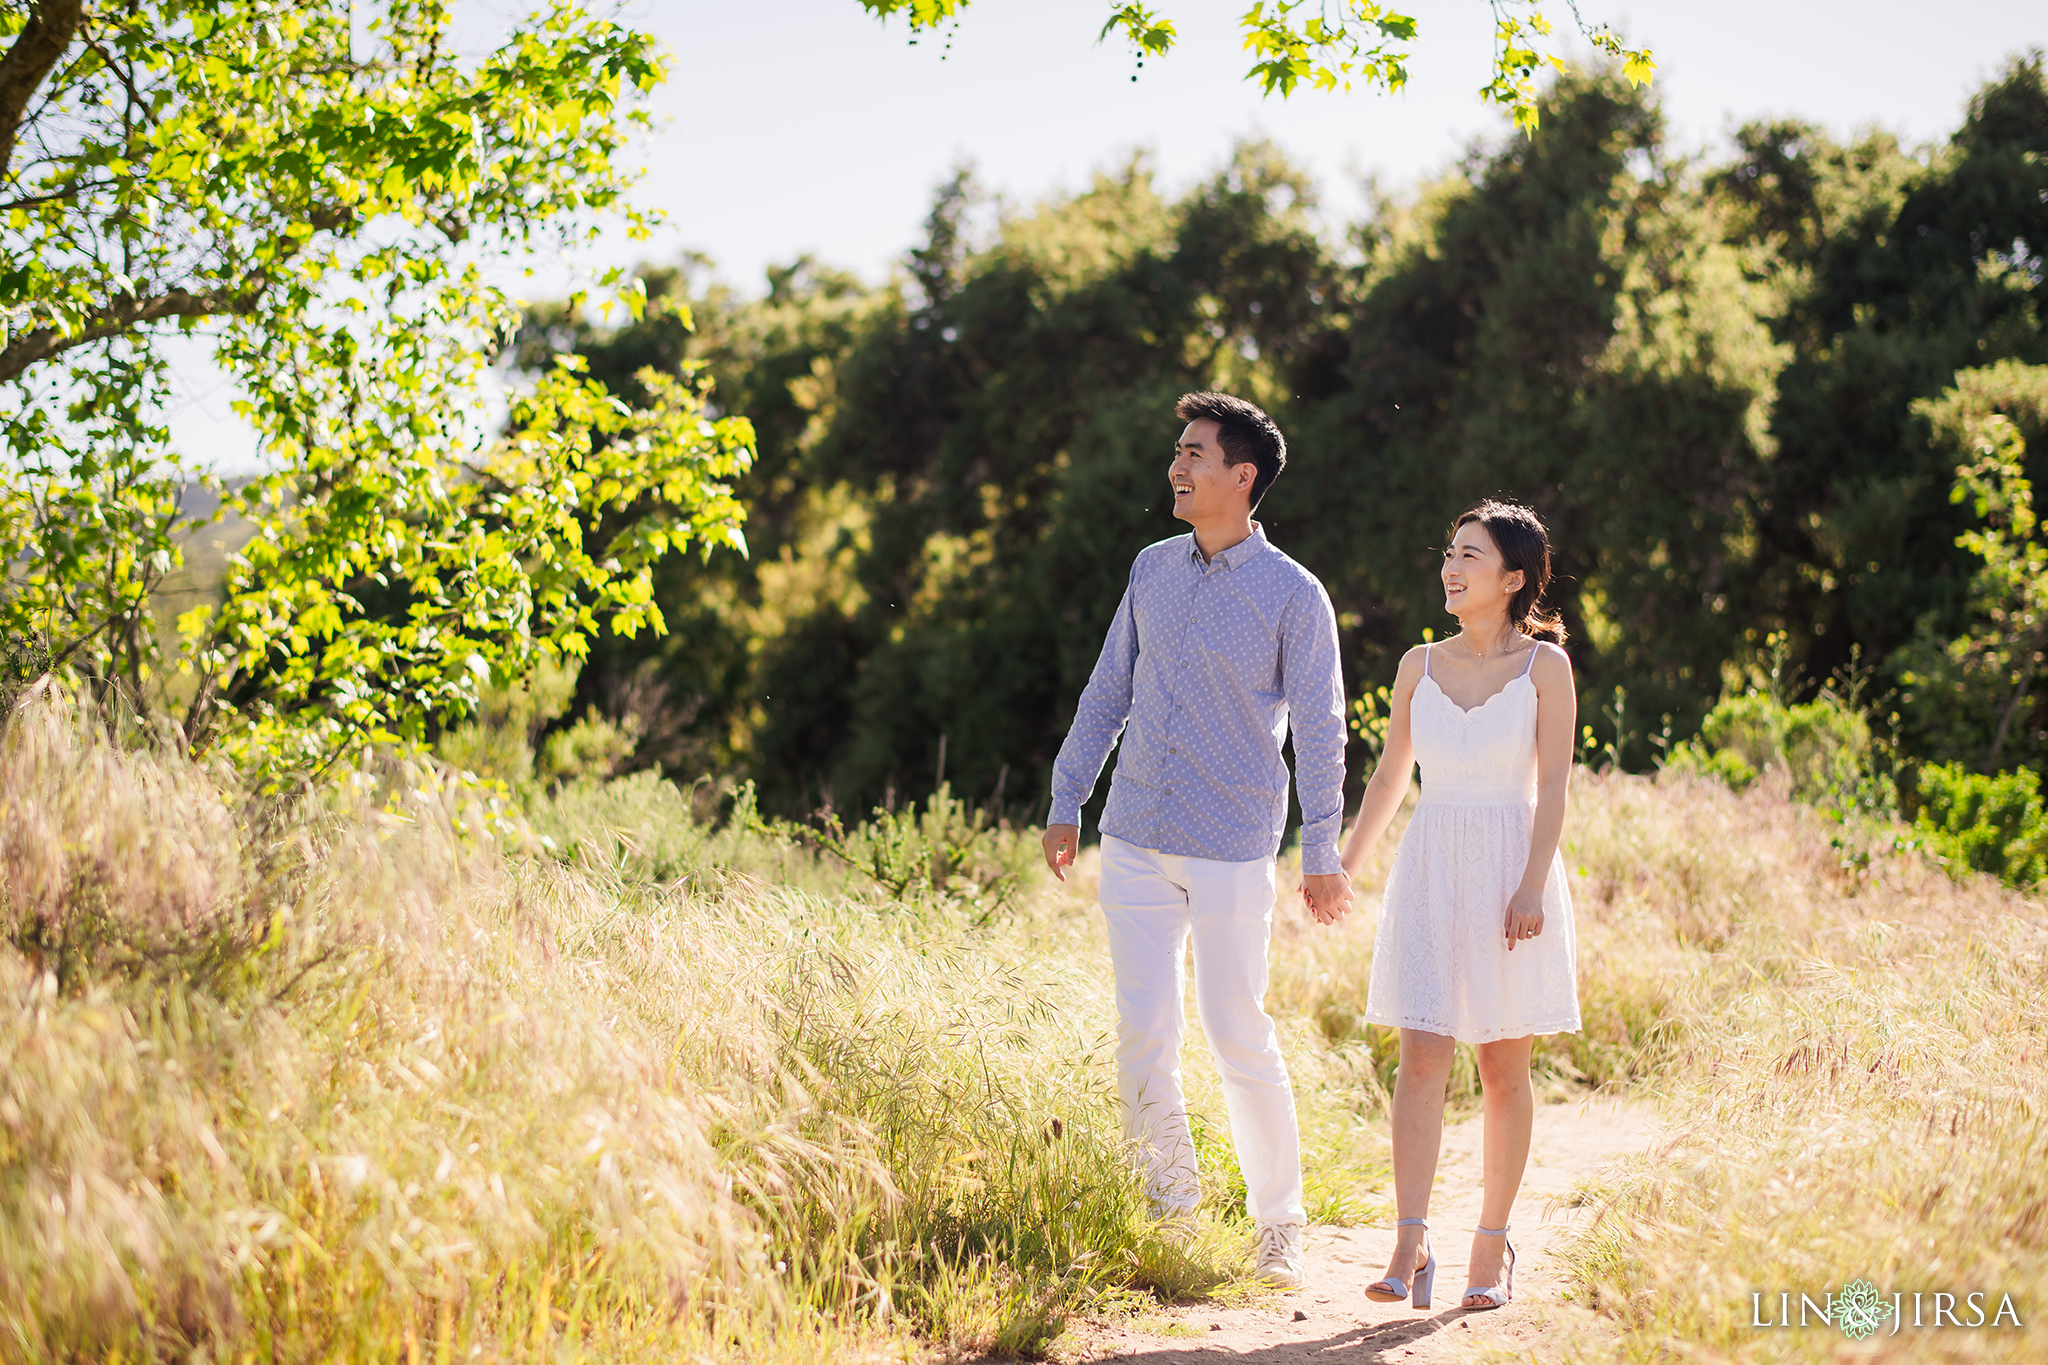 03 James Dilley Orange County Engagement Photography